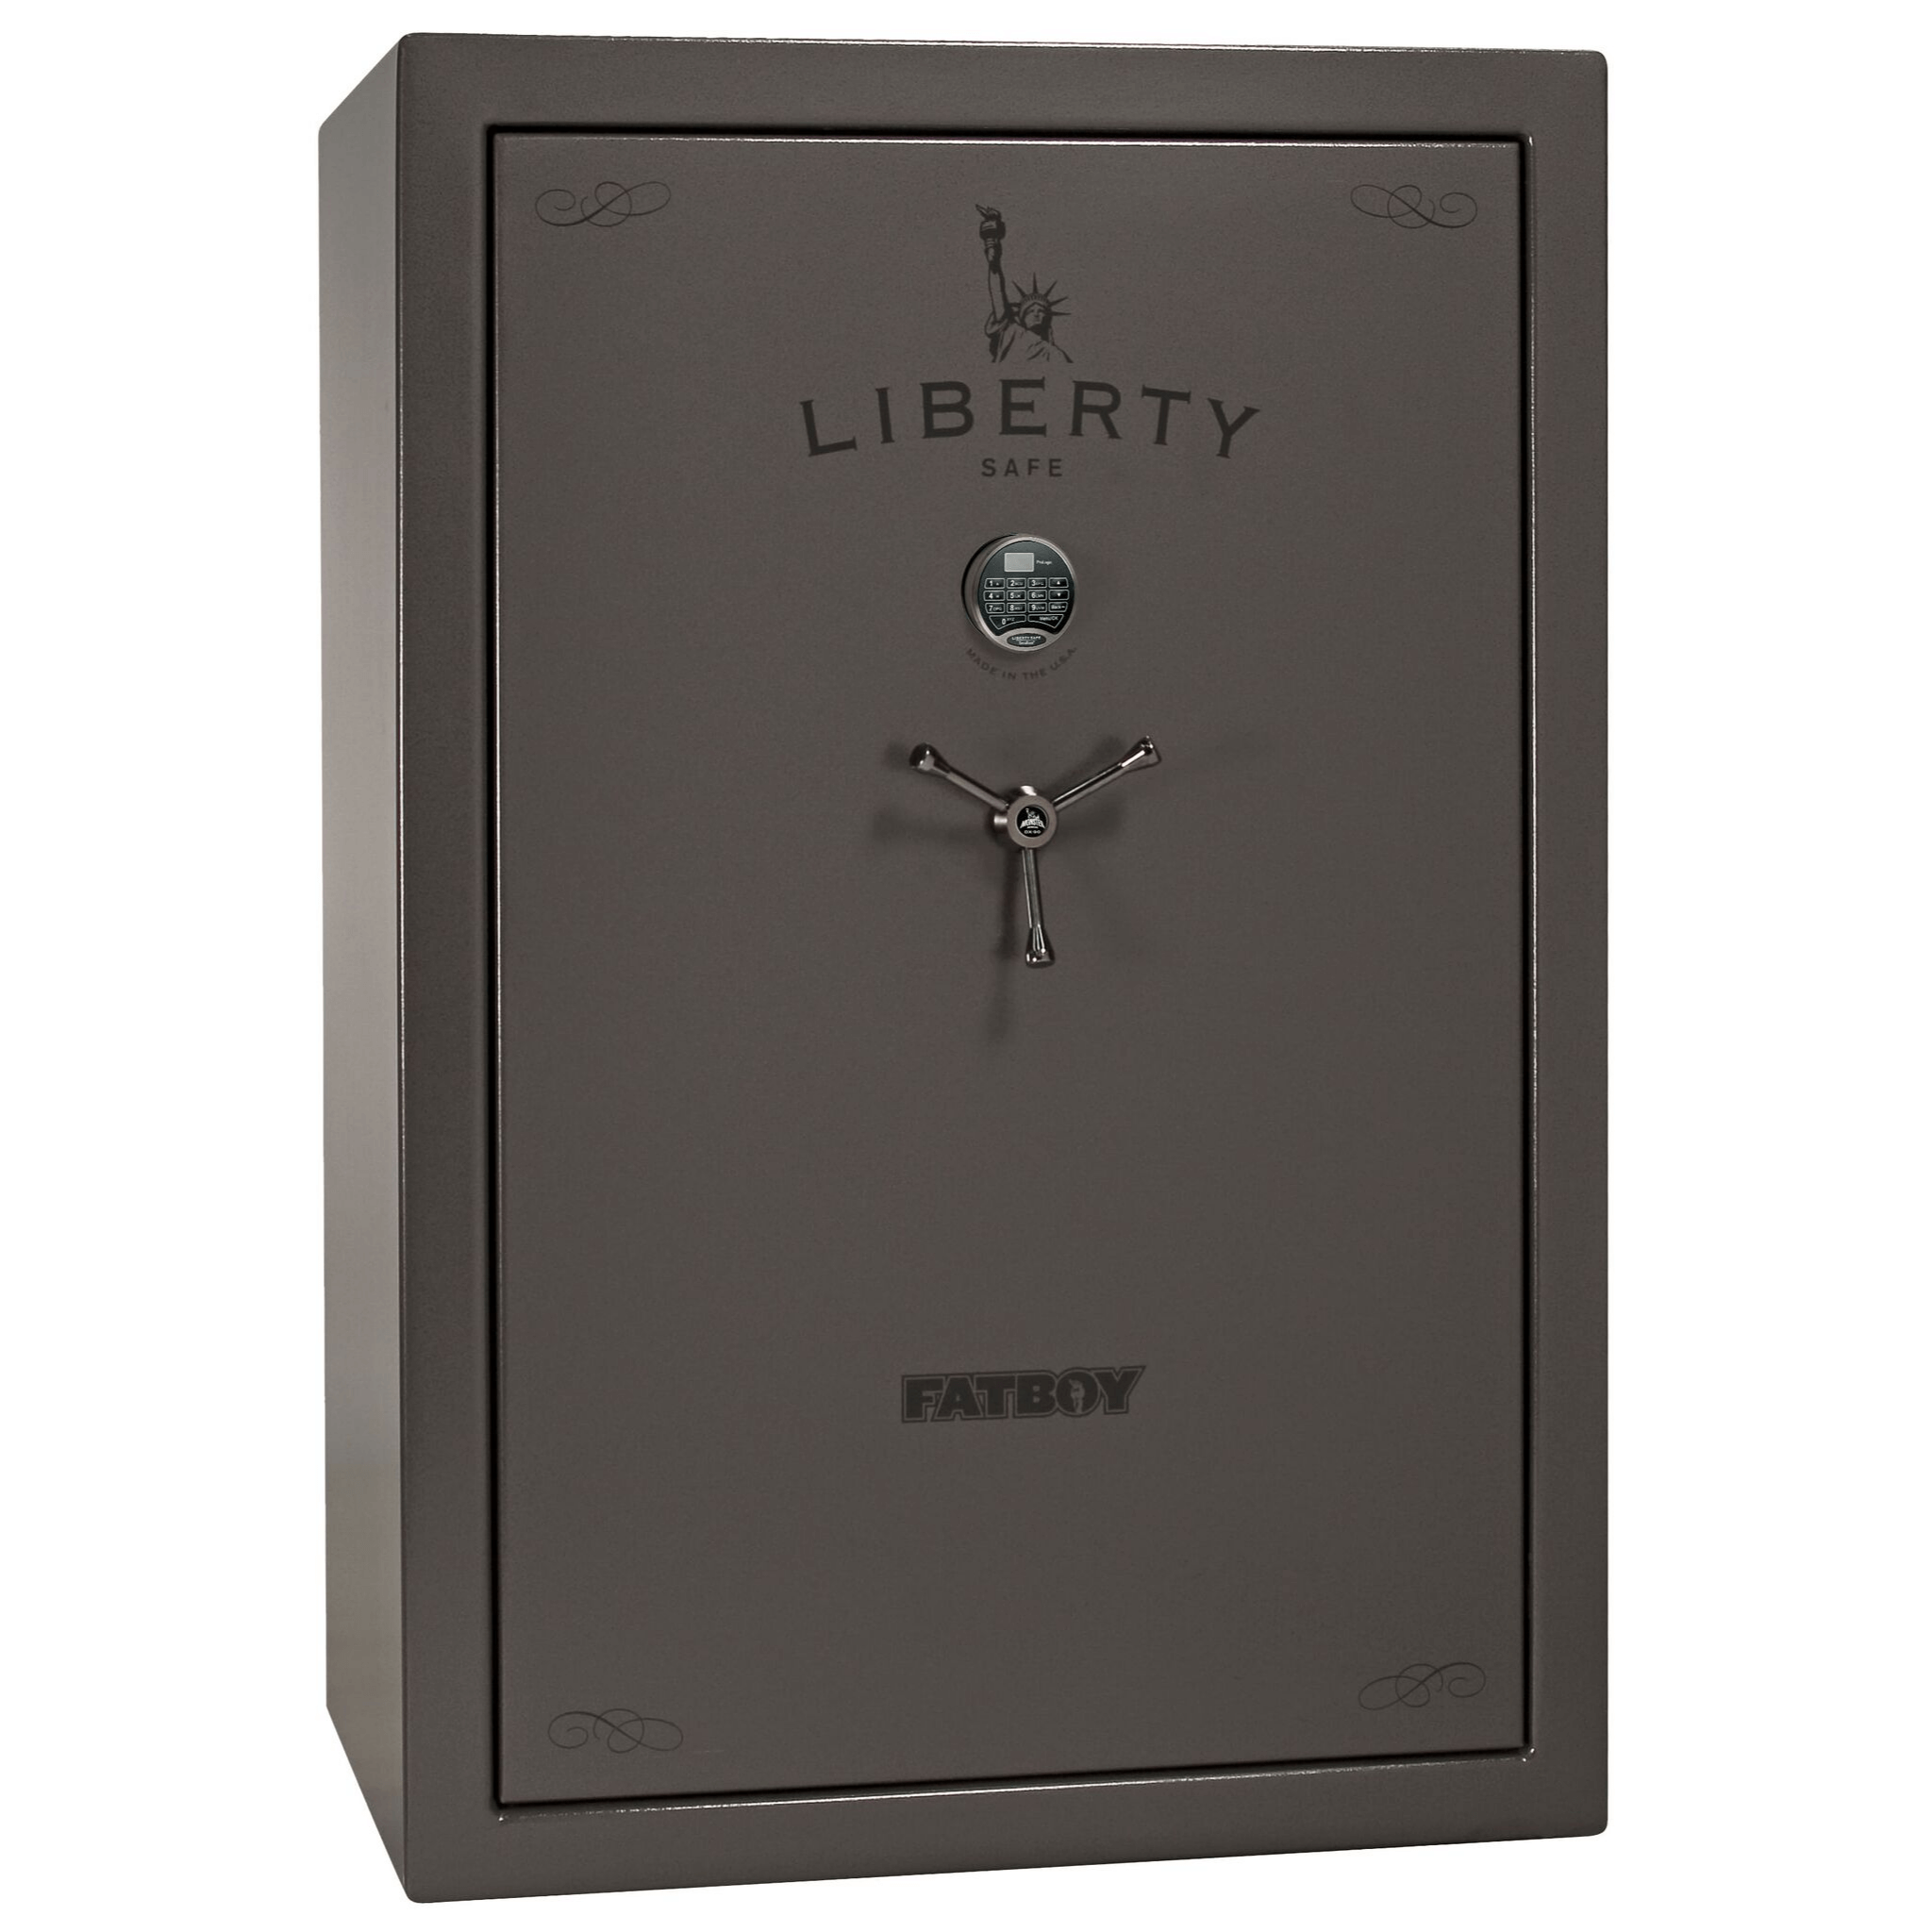 Fatboy Series | Level 4 Security | 90 Minute Fire Protection | 64XT | Dimensions: 60.5"(H) x 42"(W) x 32"(D) | Extreme 6 in 1 Flex Interior | Black Textured | Mechanical Lock, photo 23